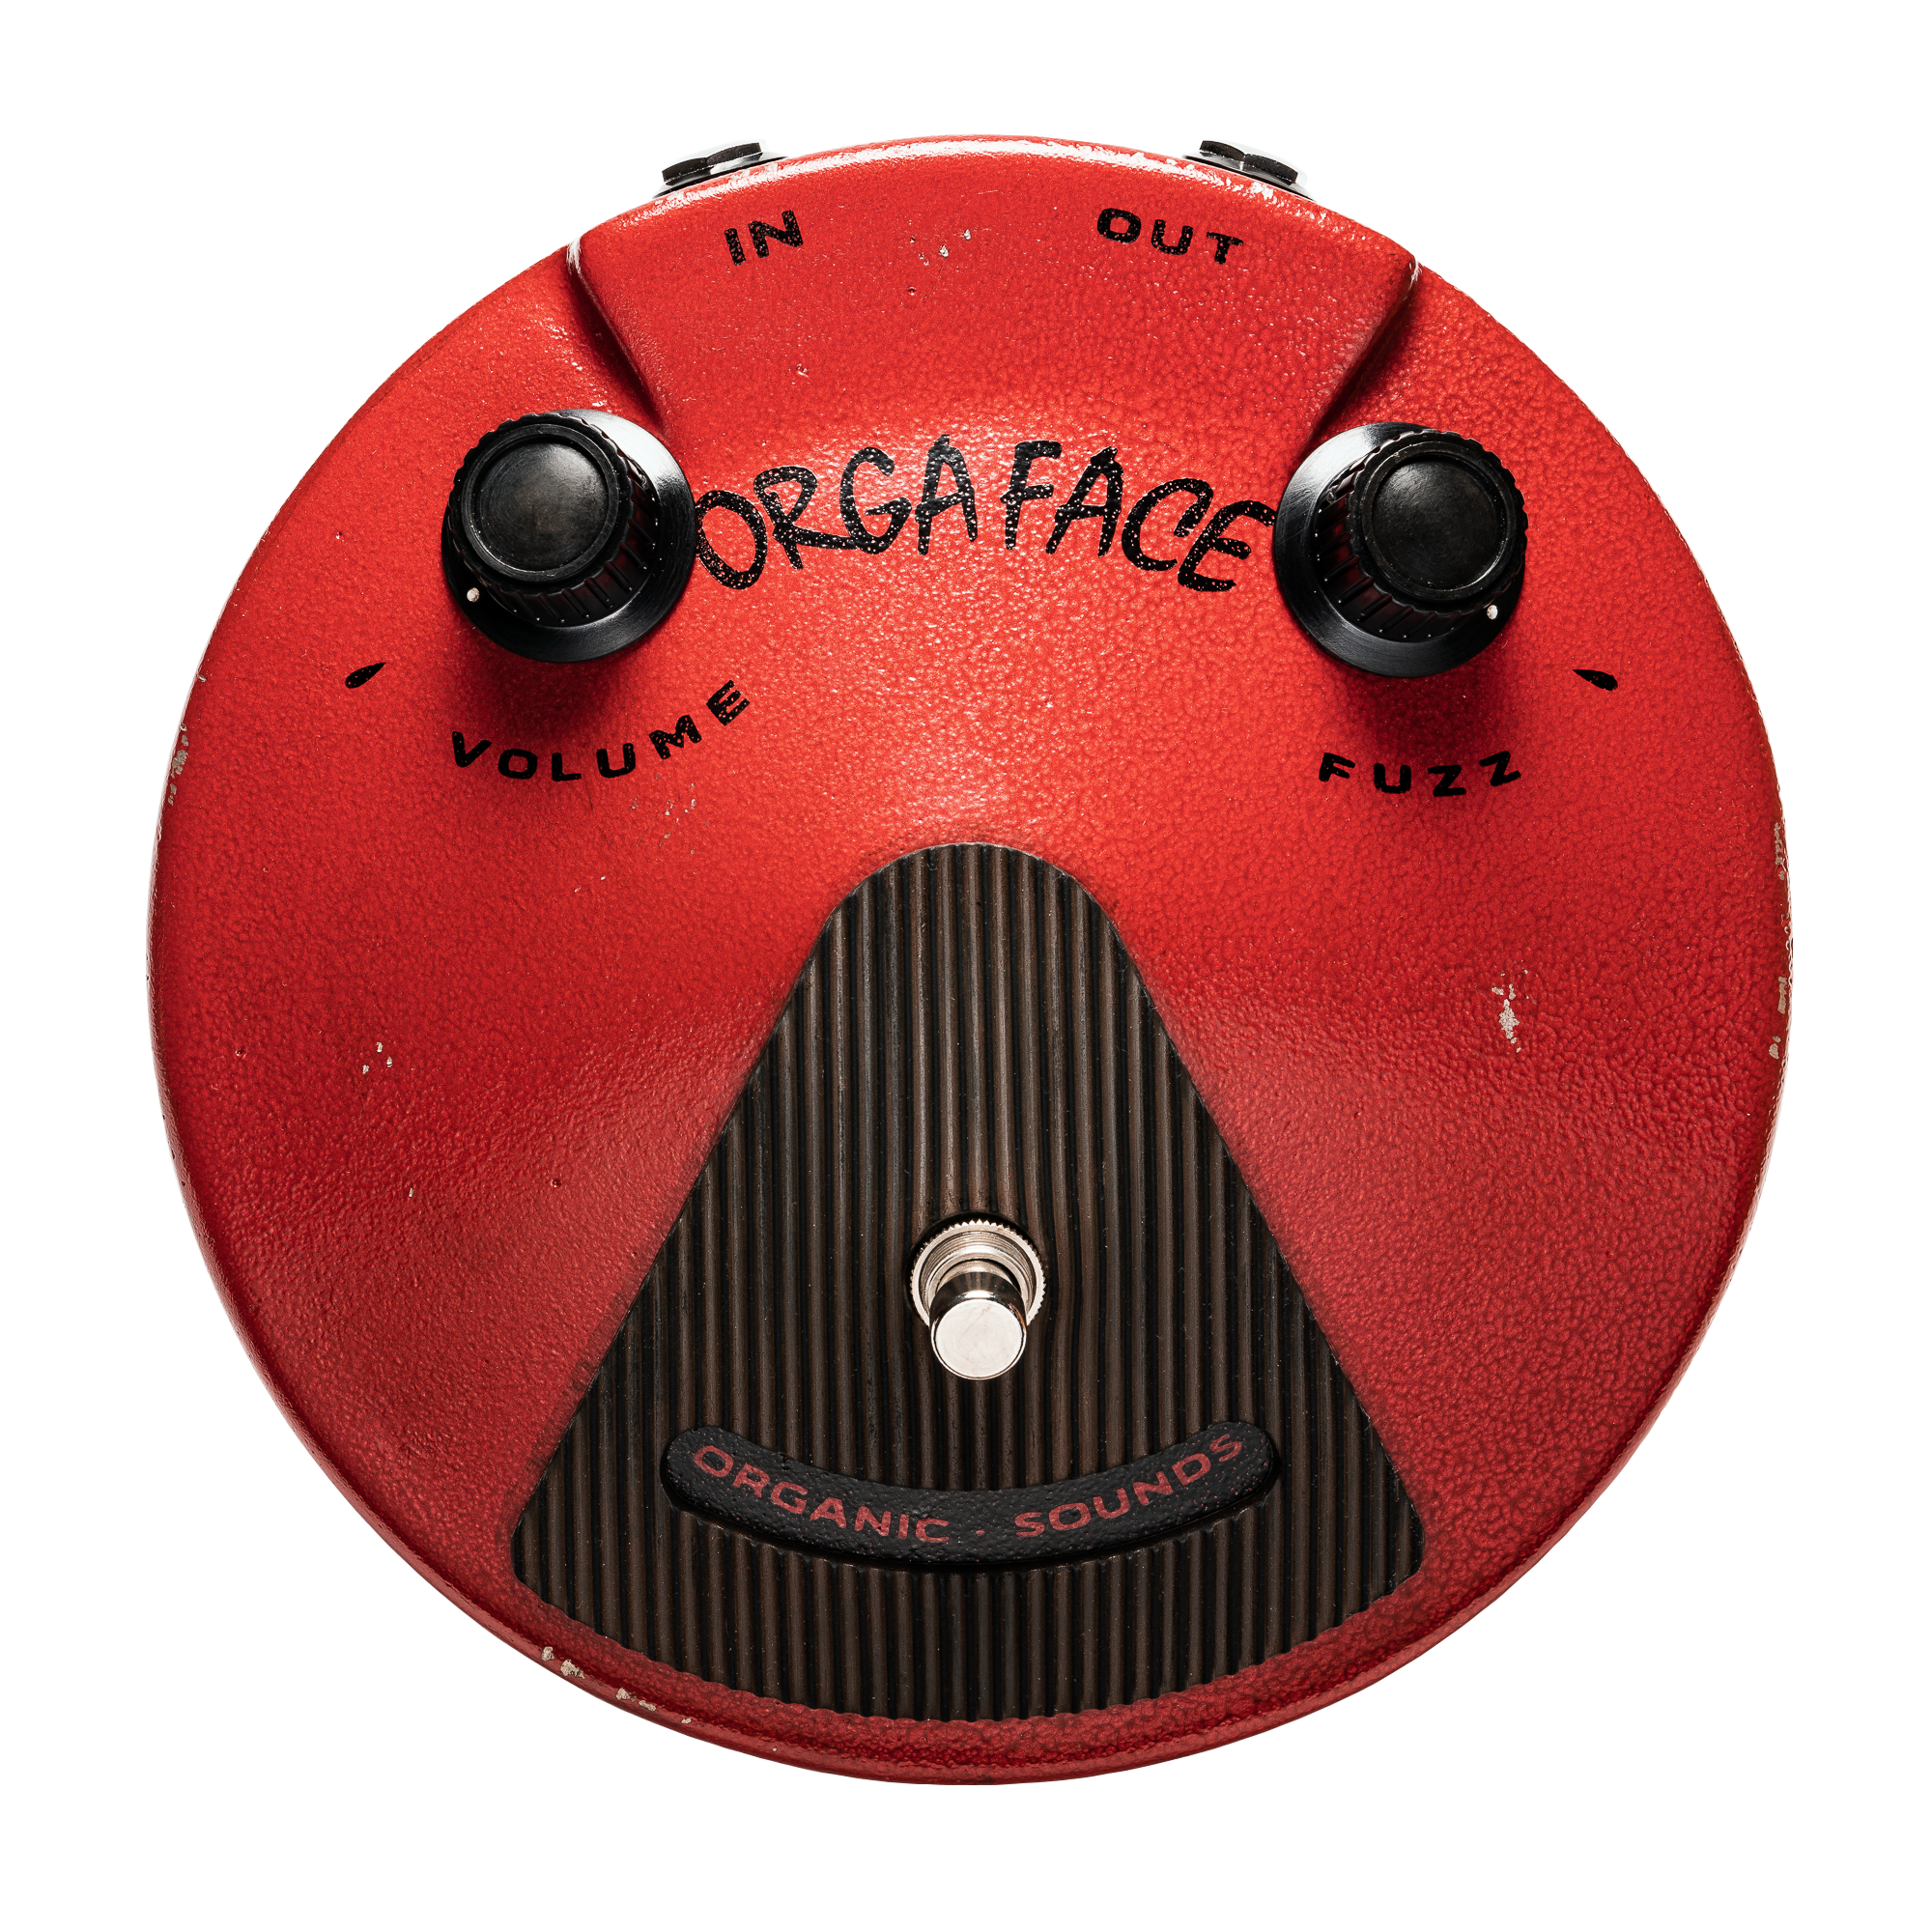 OrganicSounds ORGA FACE Silicon Aged Red楽器・機材 - ギター